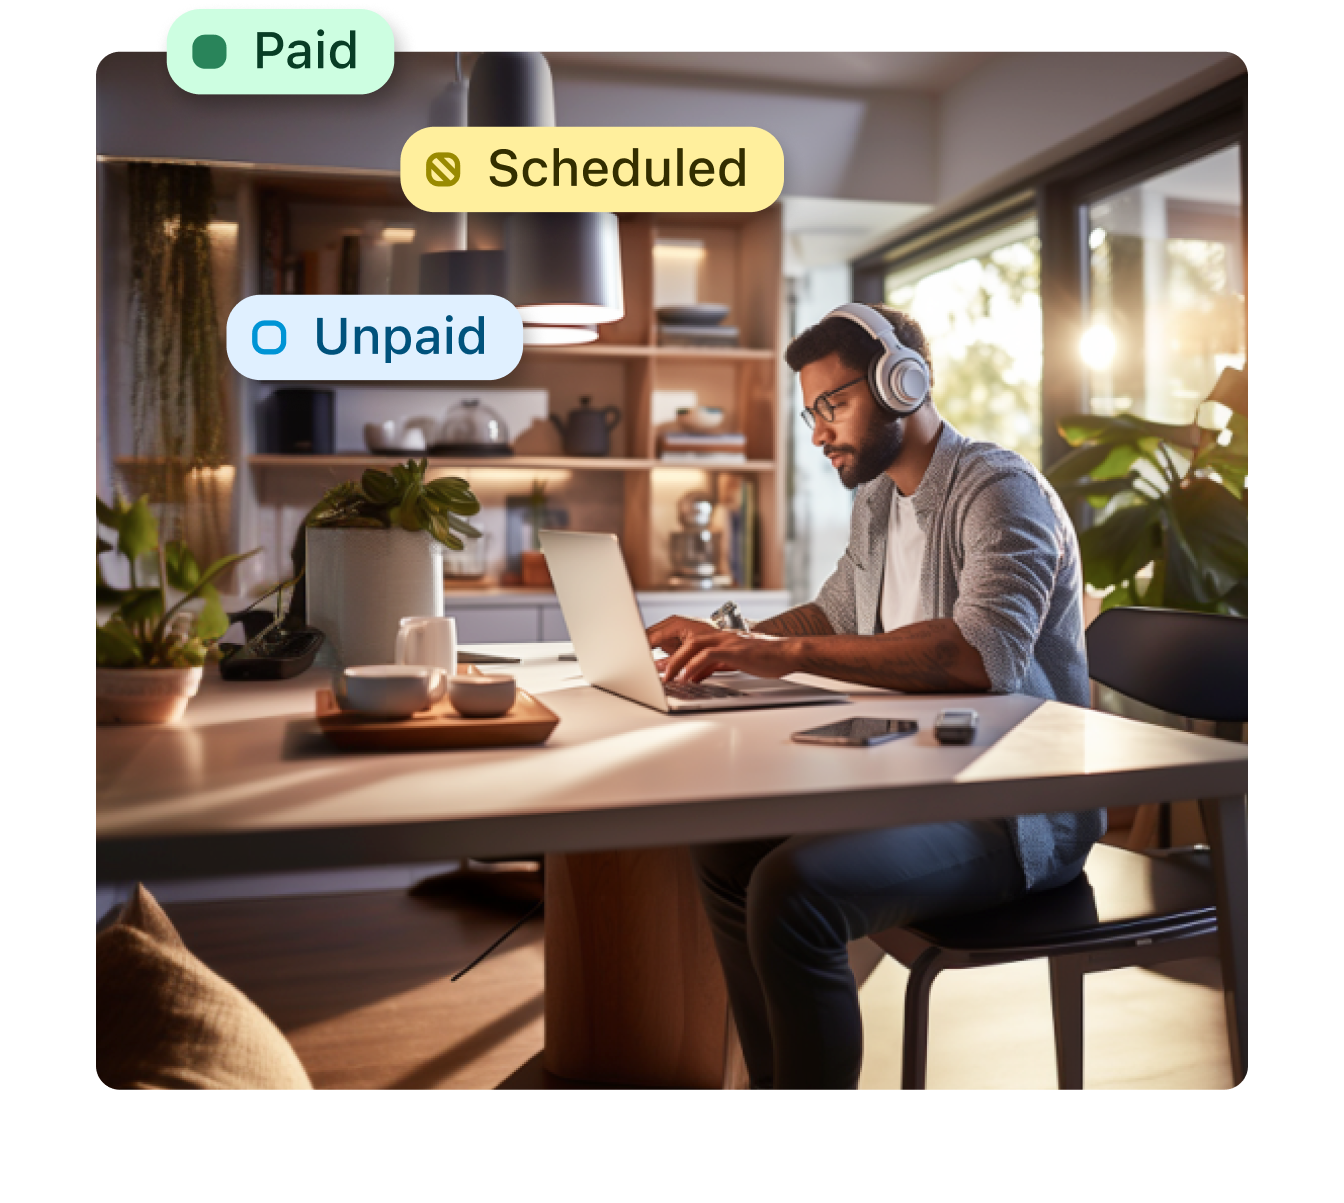 Man reviews bills categorized as paid, scheduled, or unpaid